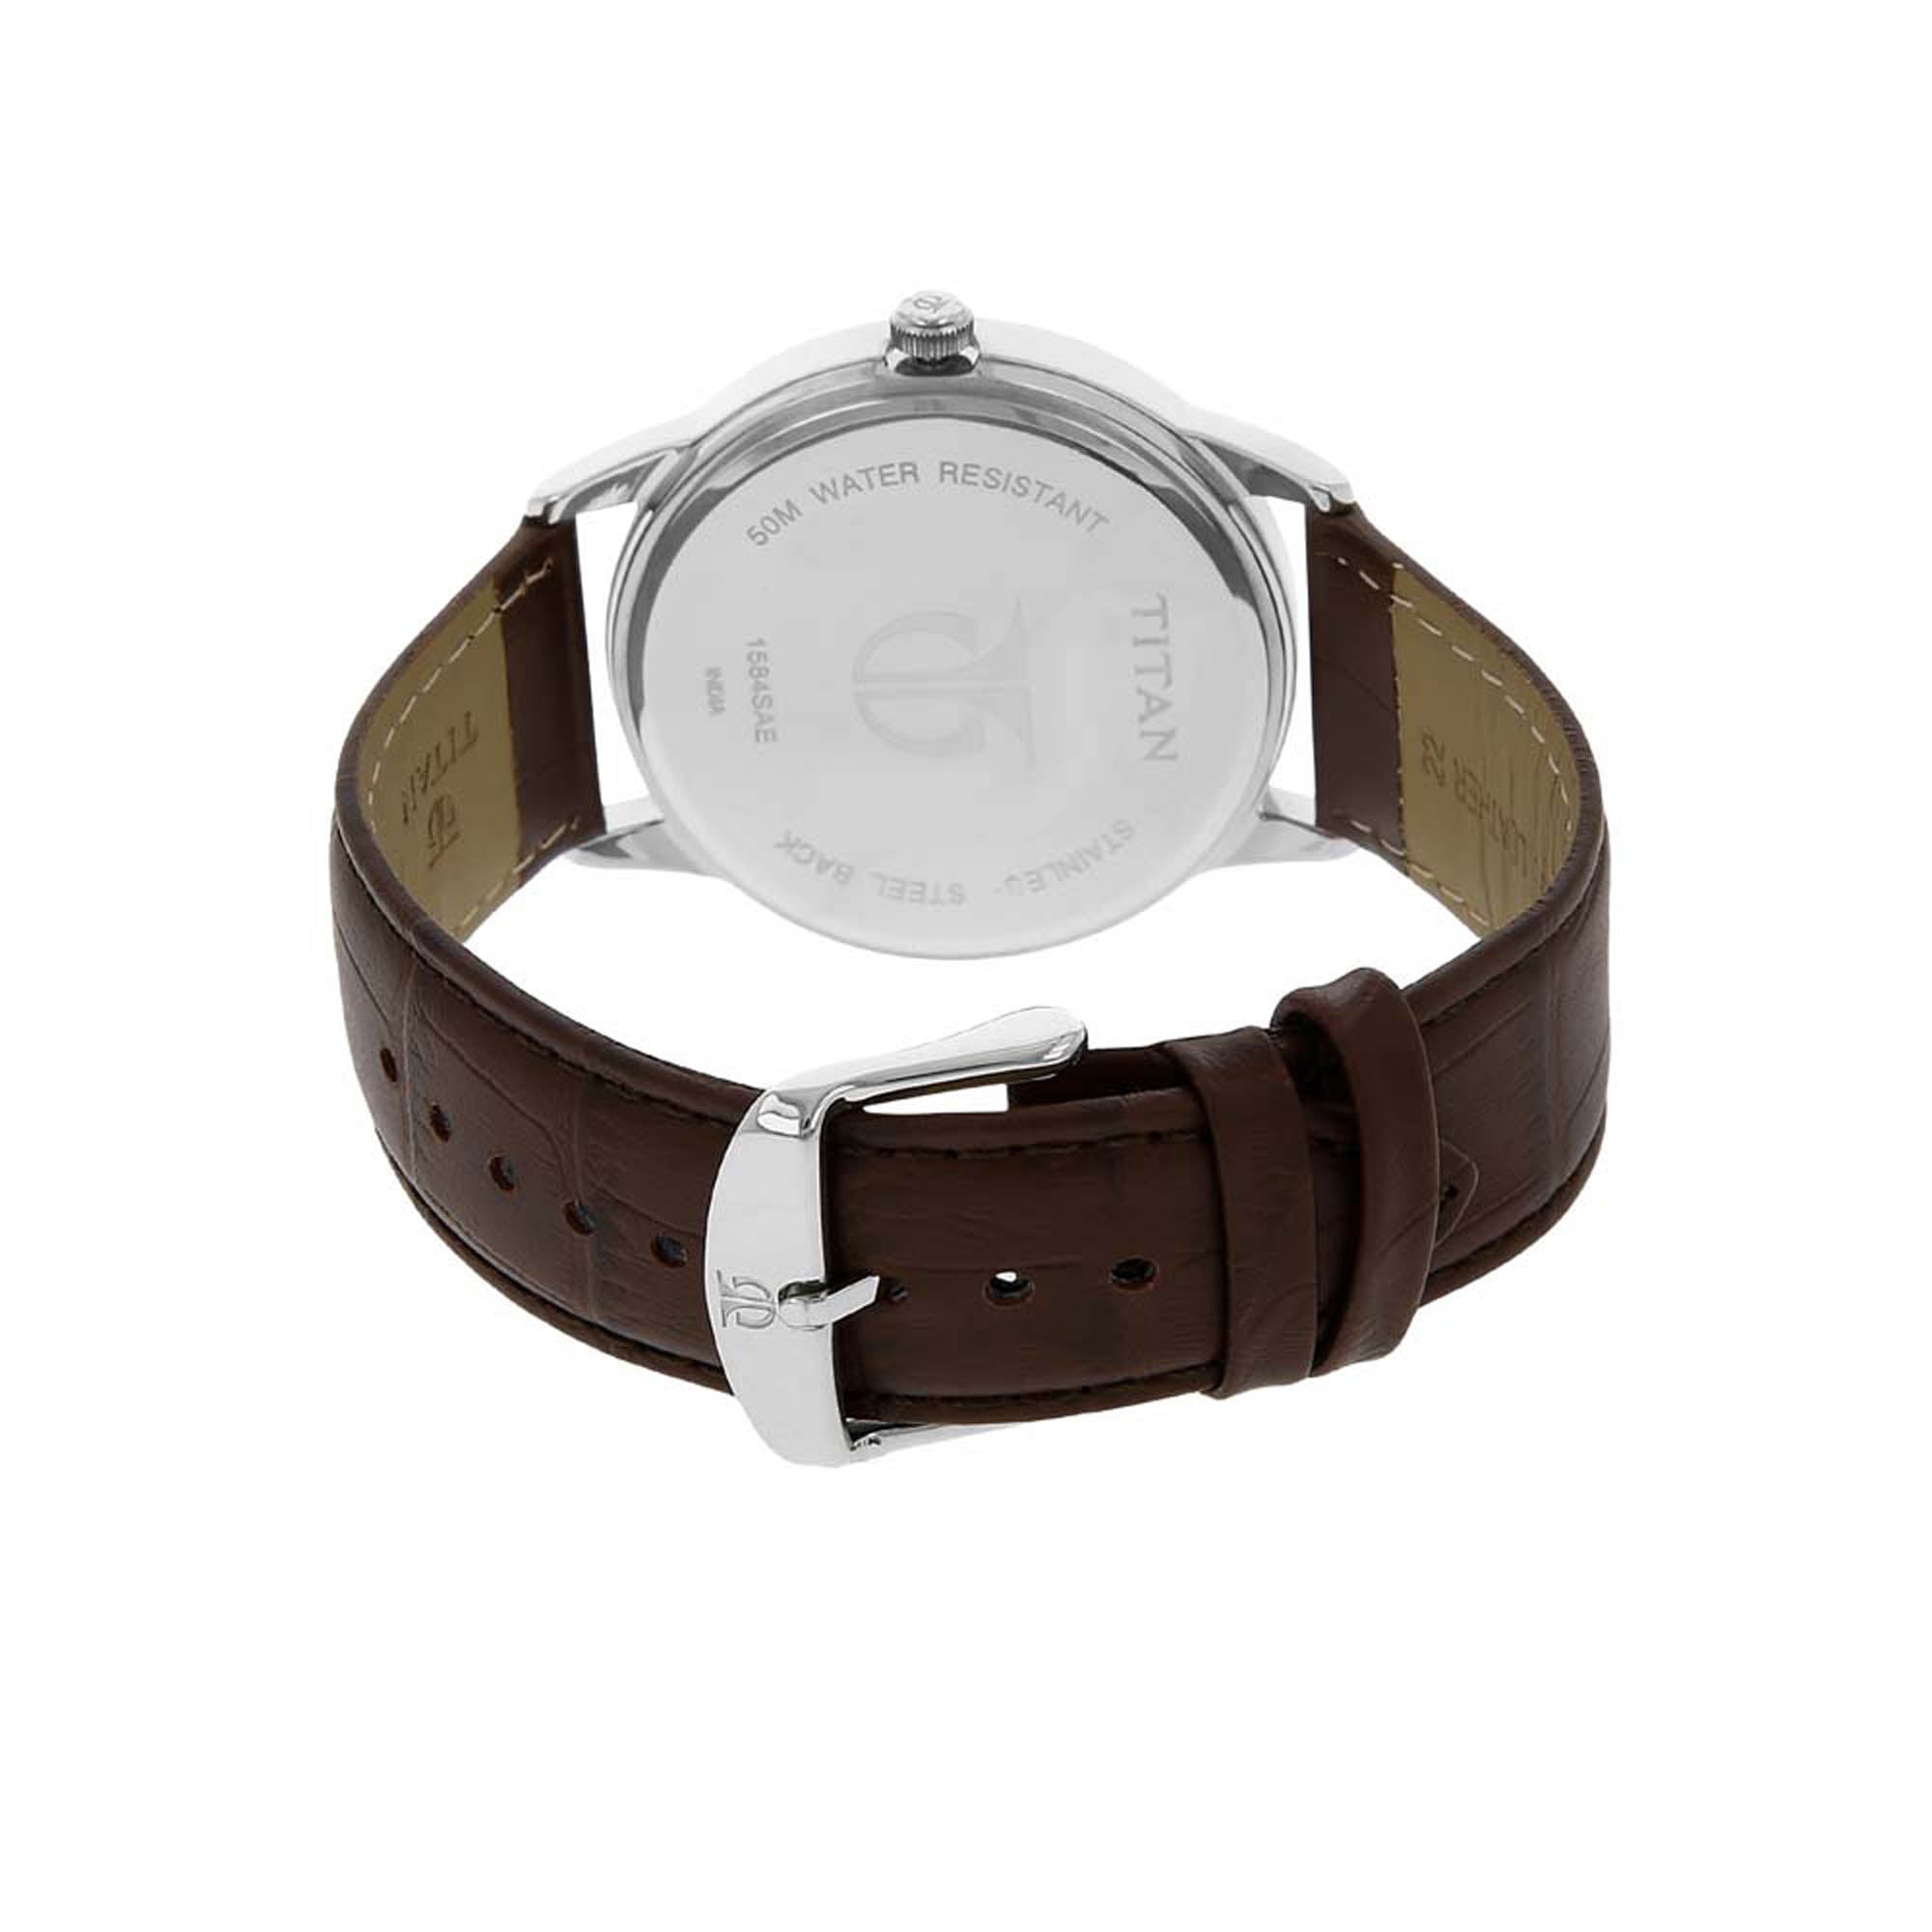 Titan Classique Silver Dial Analog with Date Leather Strap watch for Men